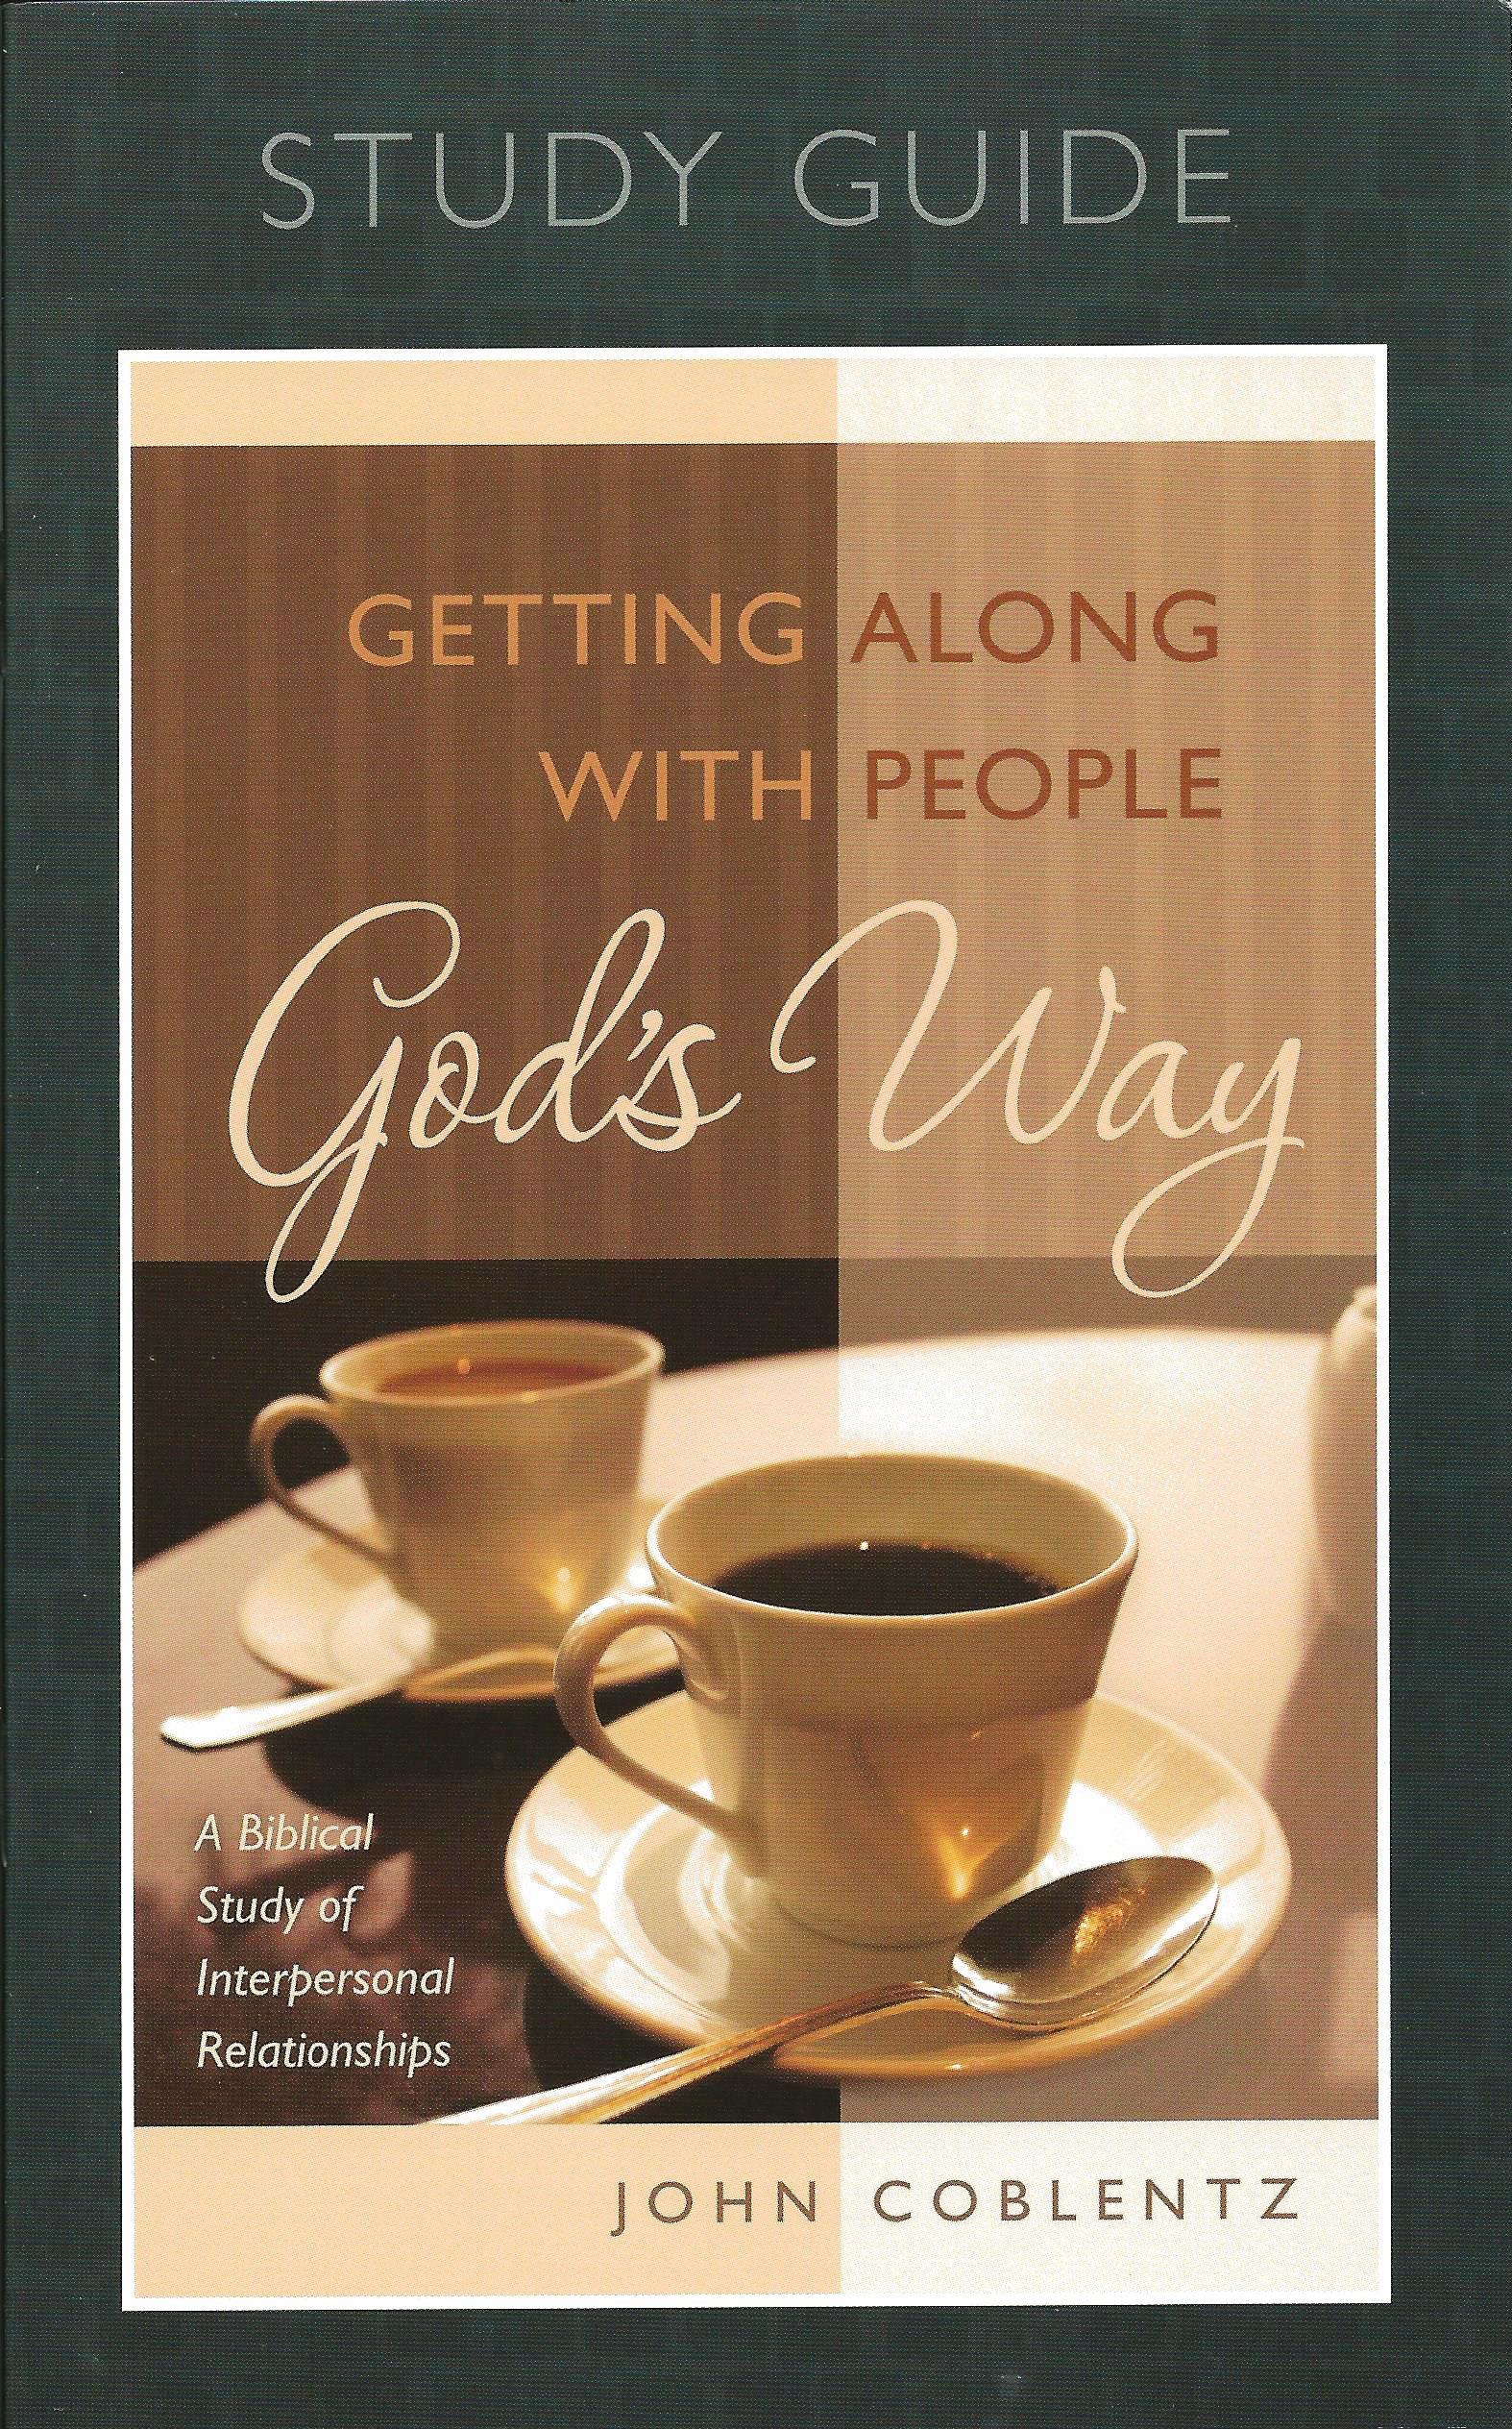 GETTING ALONG WITH PEOPLE GOD'S WAY-Study Guide John Coblentz